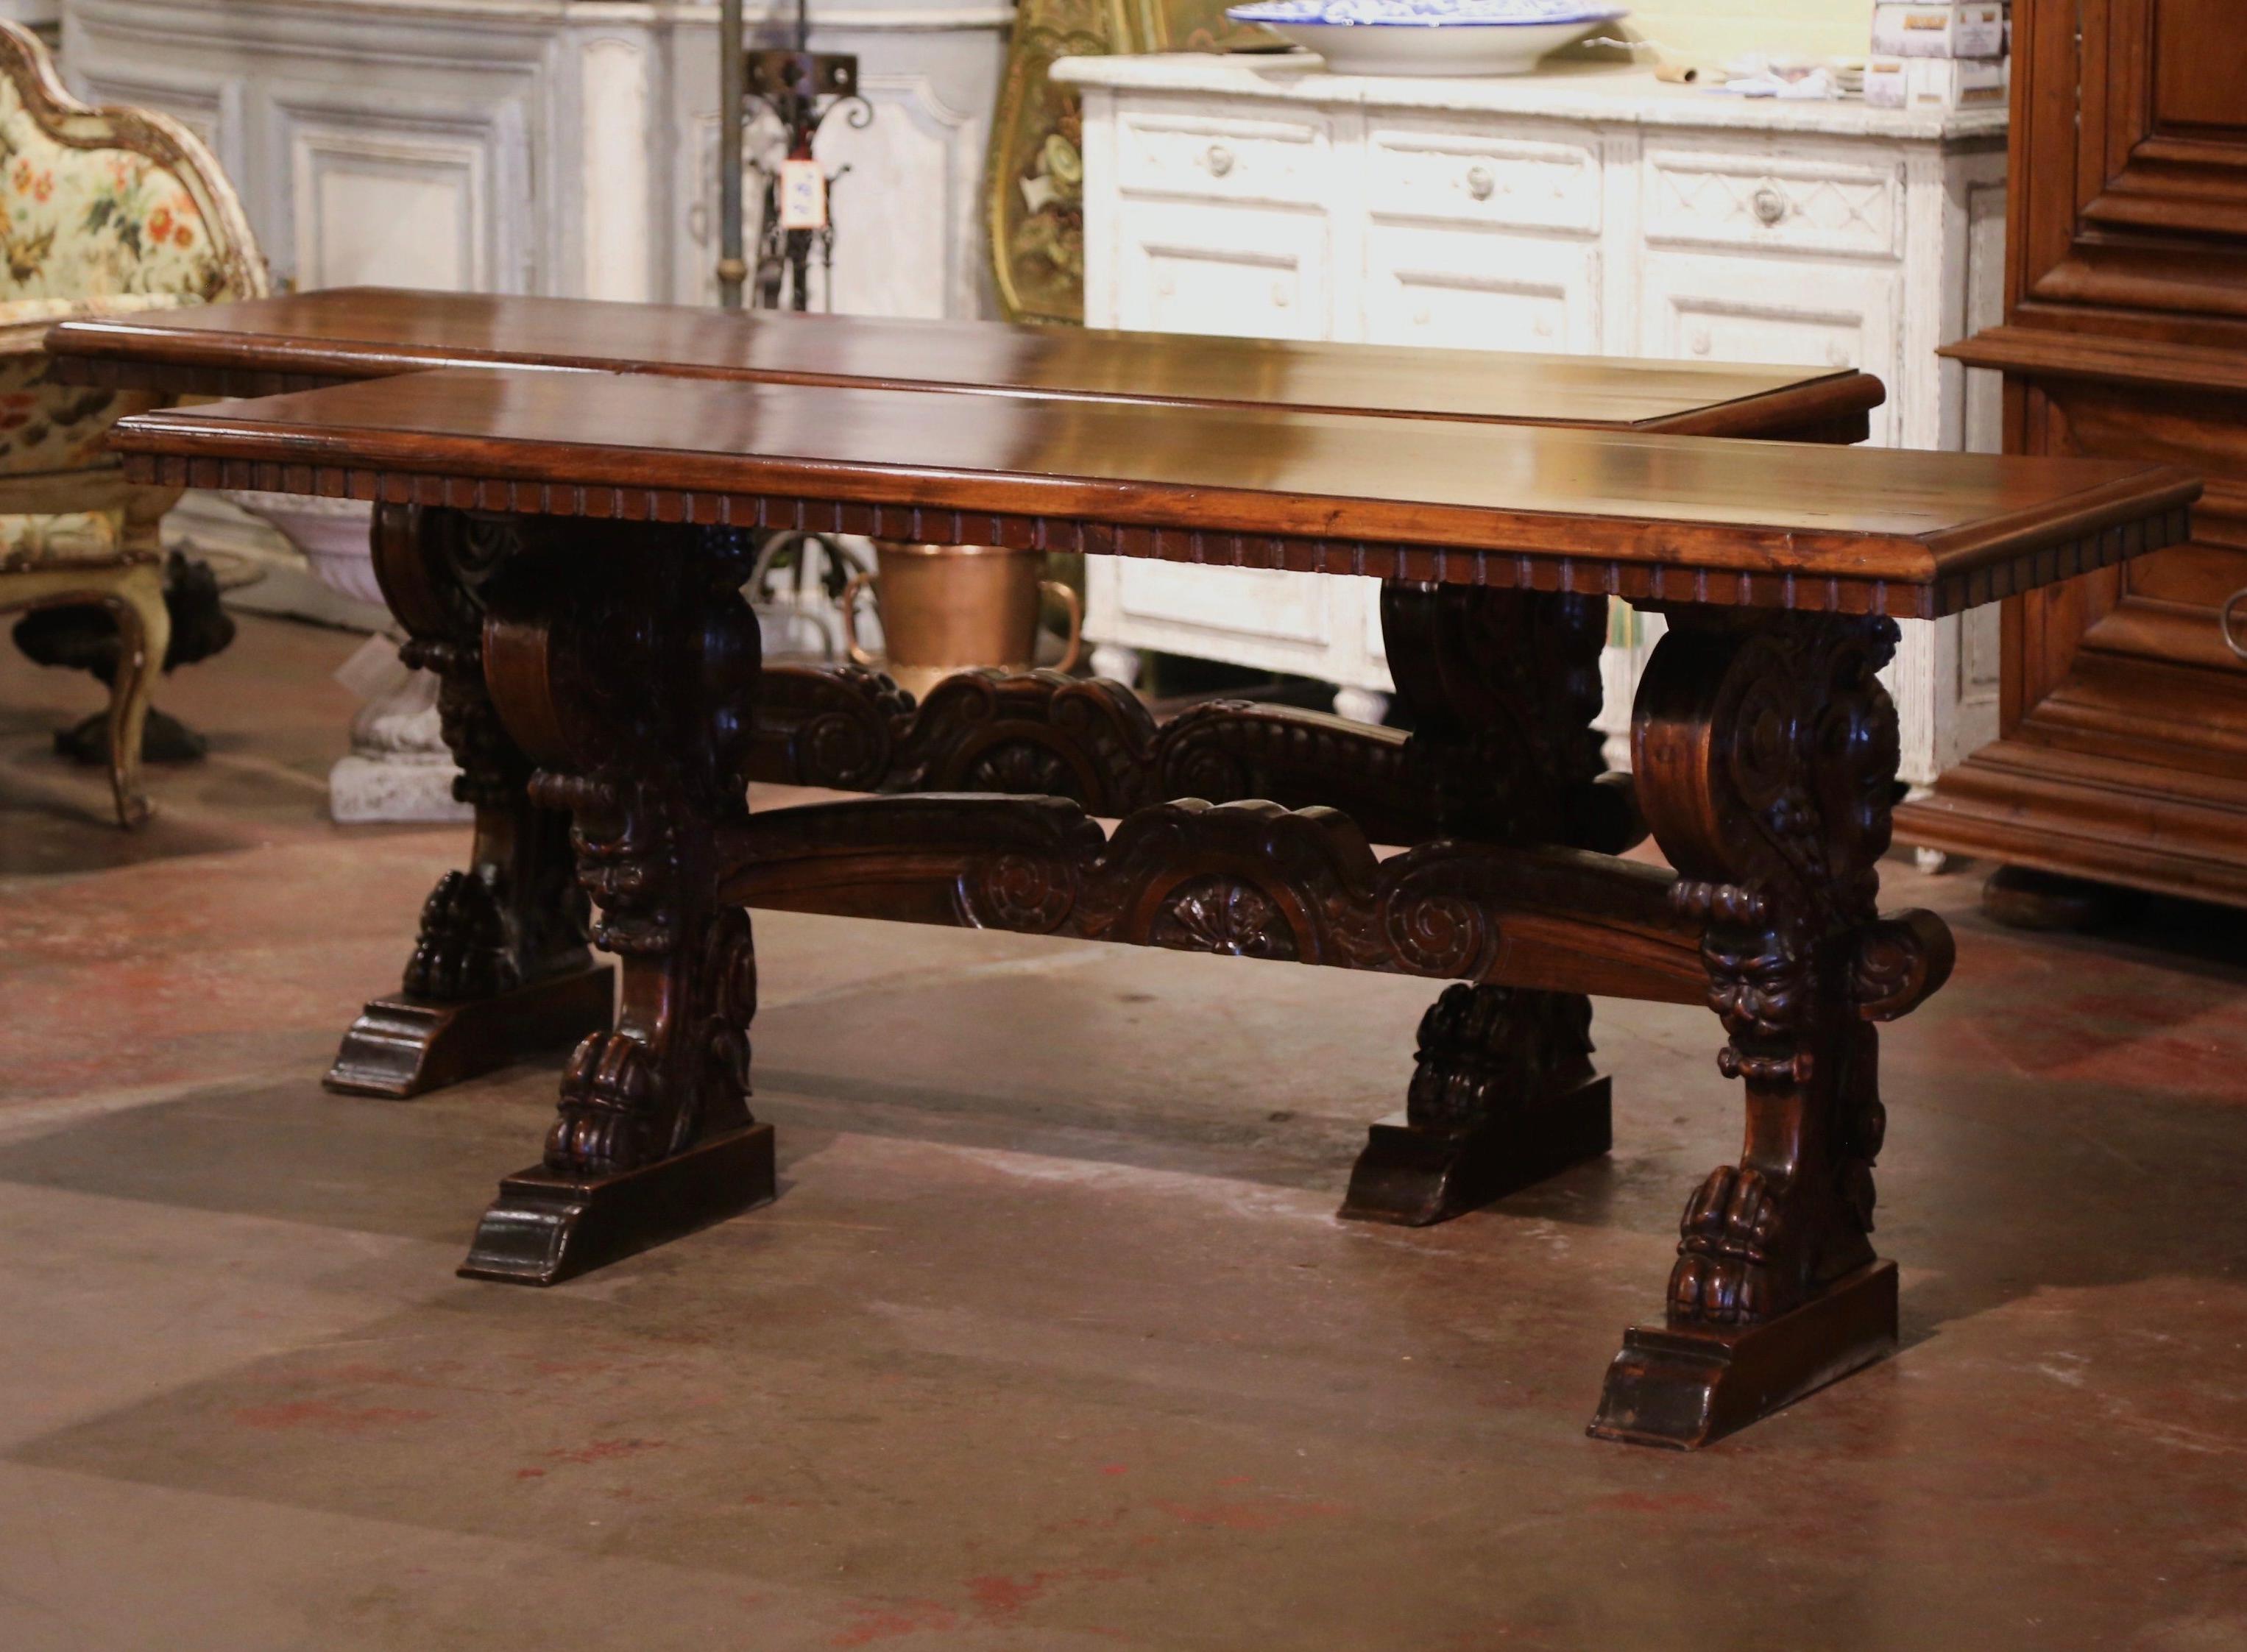 Bring the Italian elegance in your home with this important pair of antique Renaissance console tables. Crafted in Italy circa 1850 and over six feet long, each trestle table built of solid walnut, stands on carved pedestal legs ending with paw feet